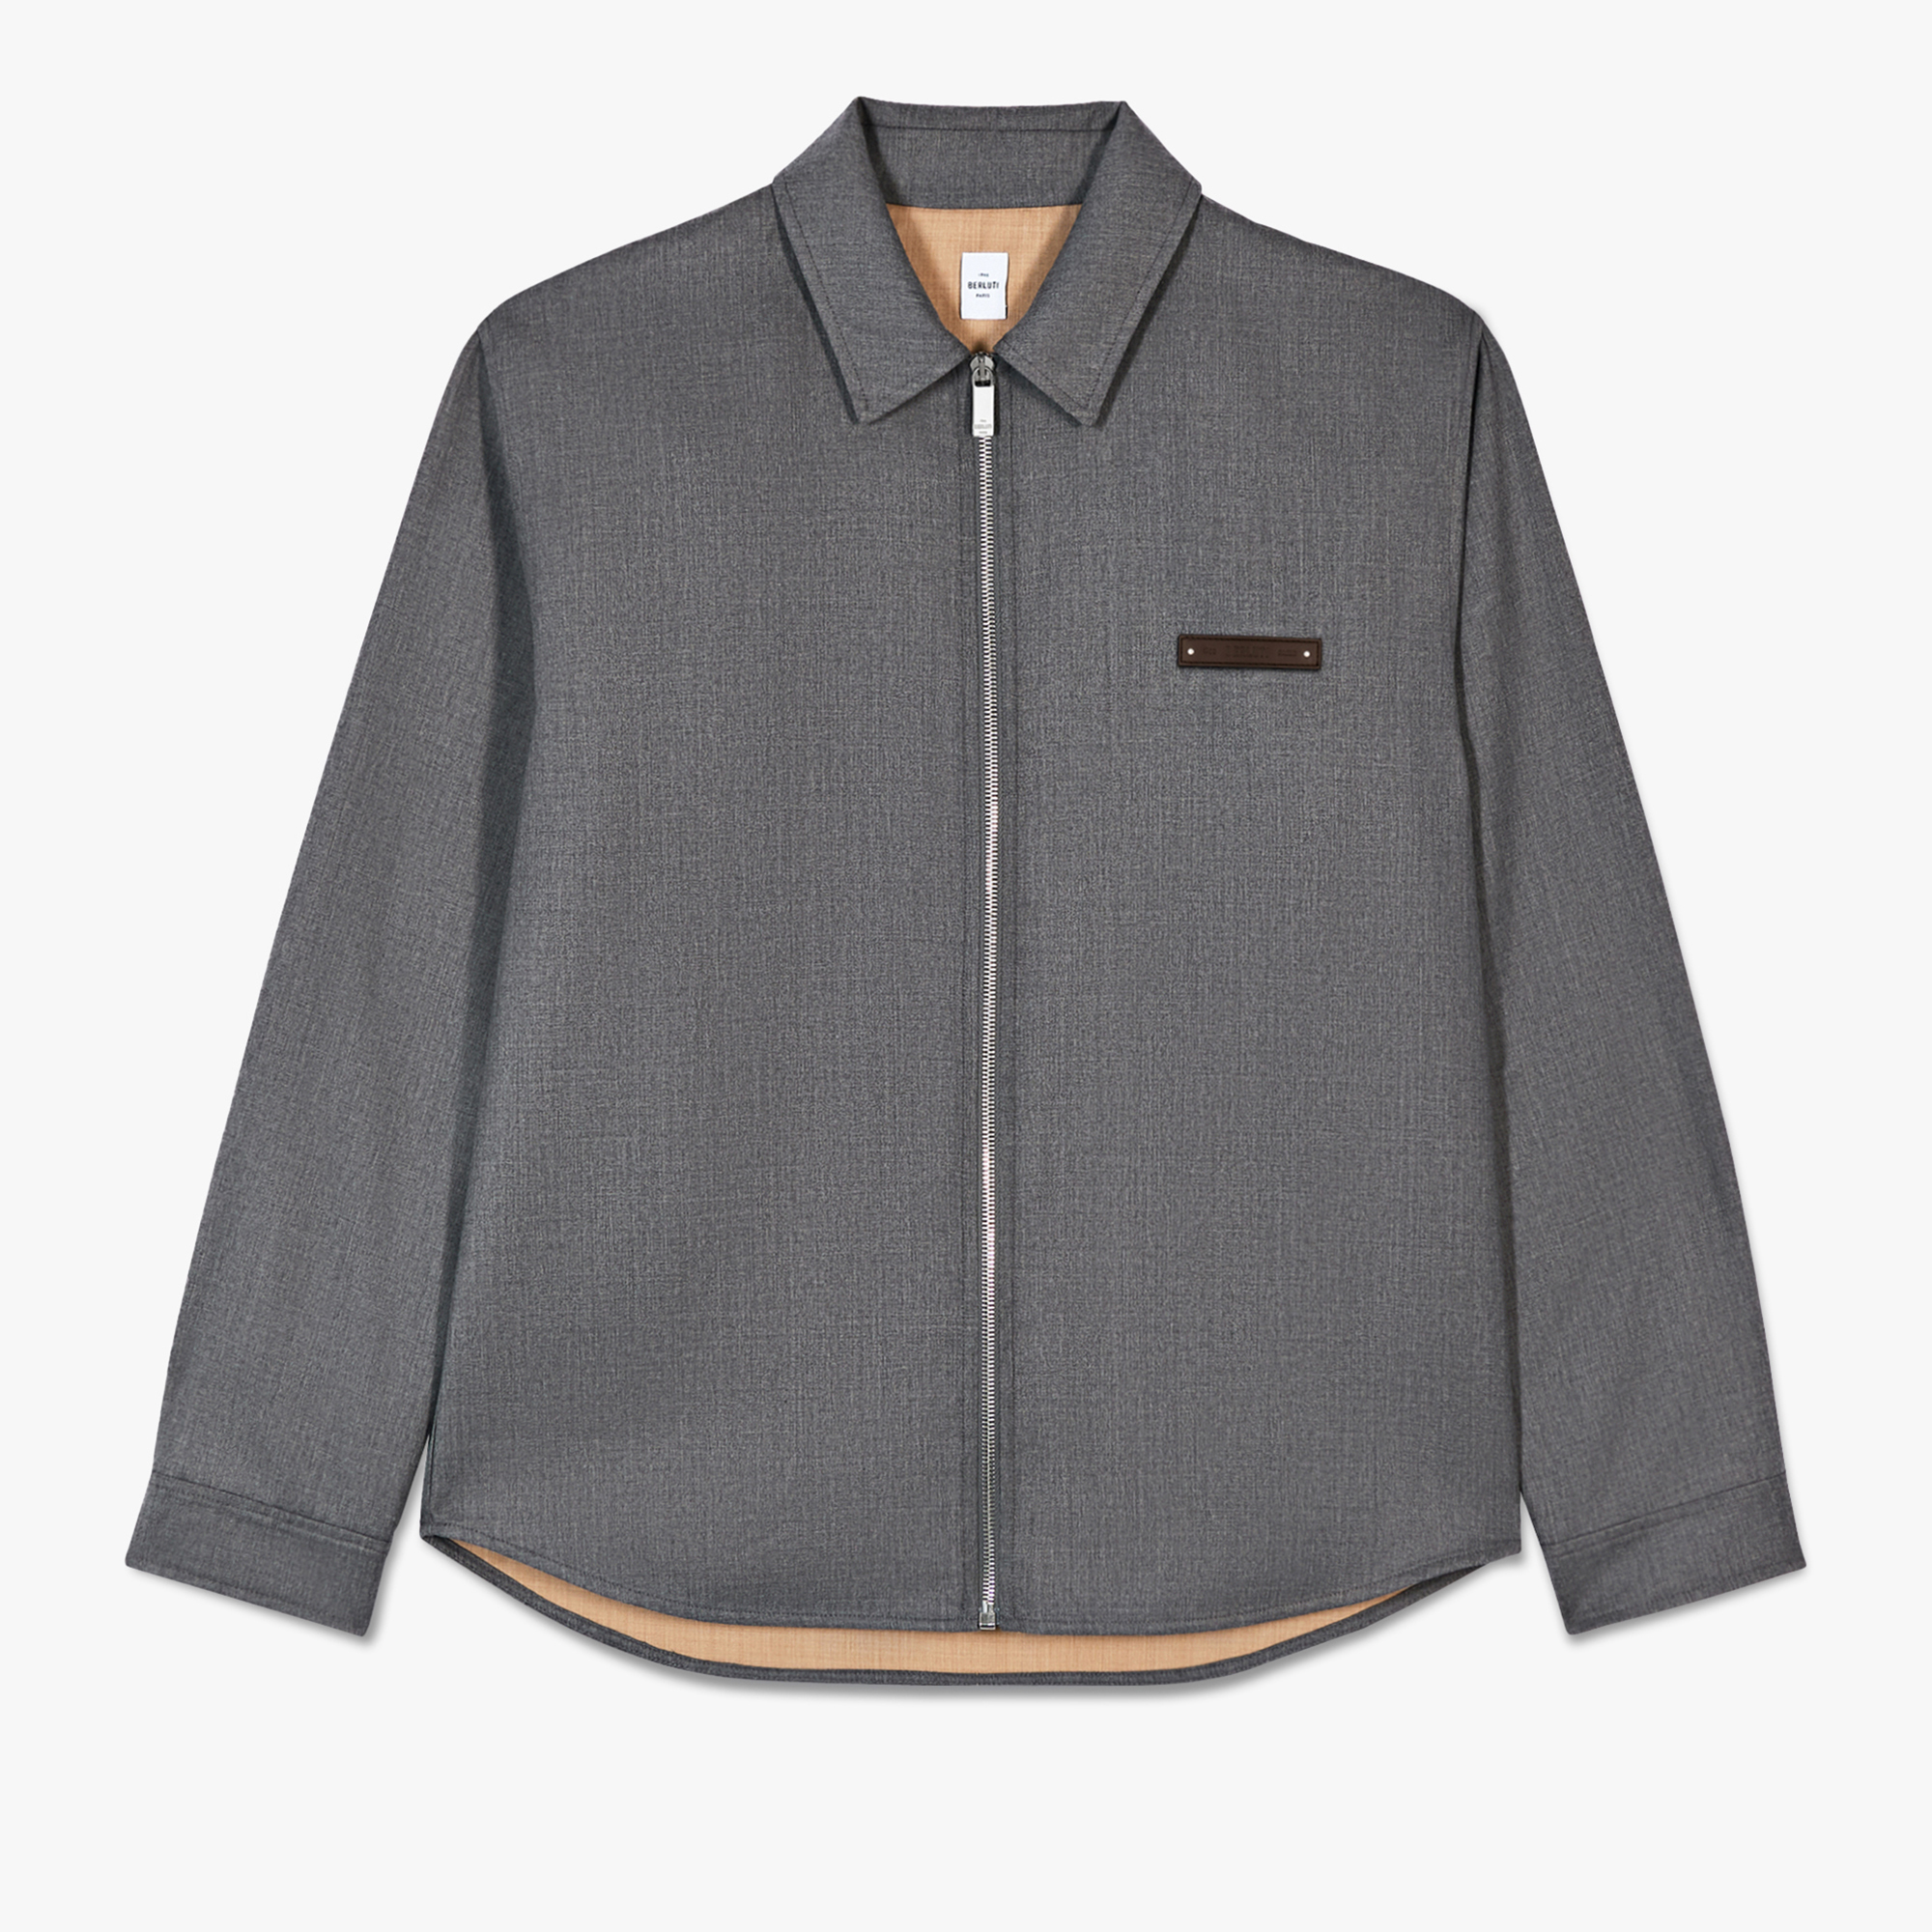 Wool Double Face Overshirt With Leather Details, STEEL GREY, hi-res